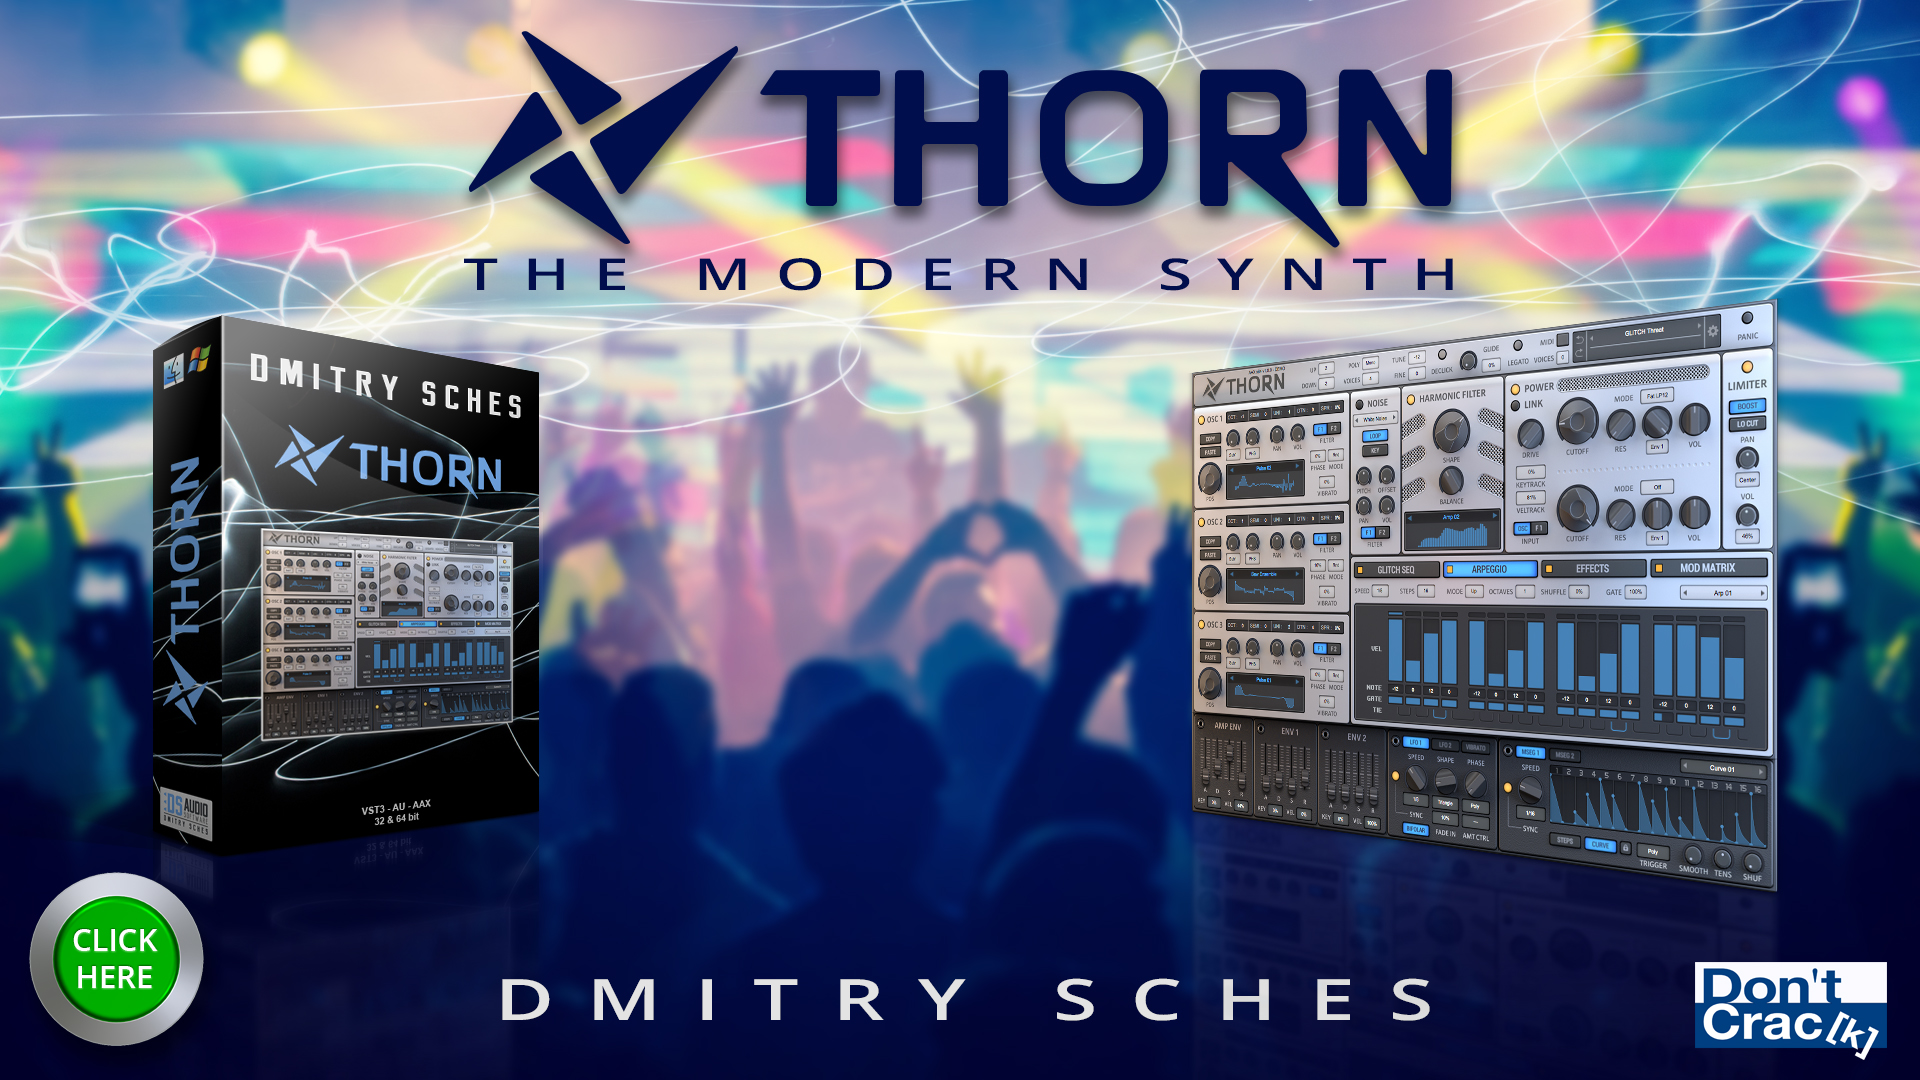 Dmitry Sches Thorn 1.3.2 for mac download